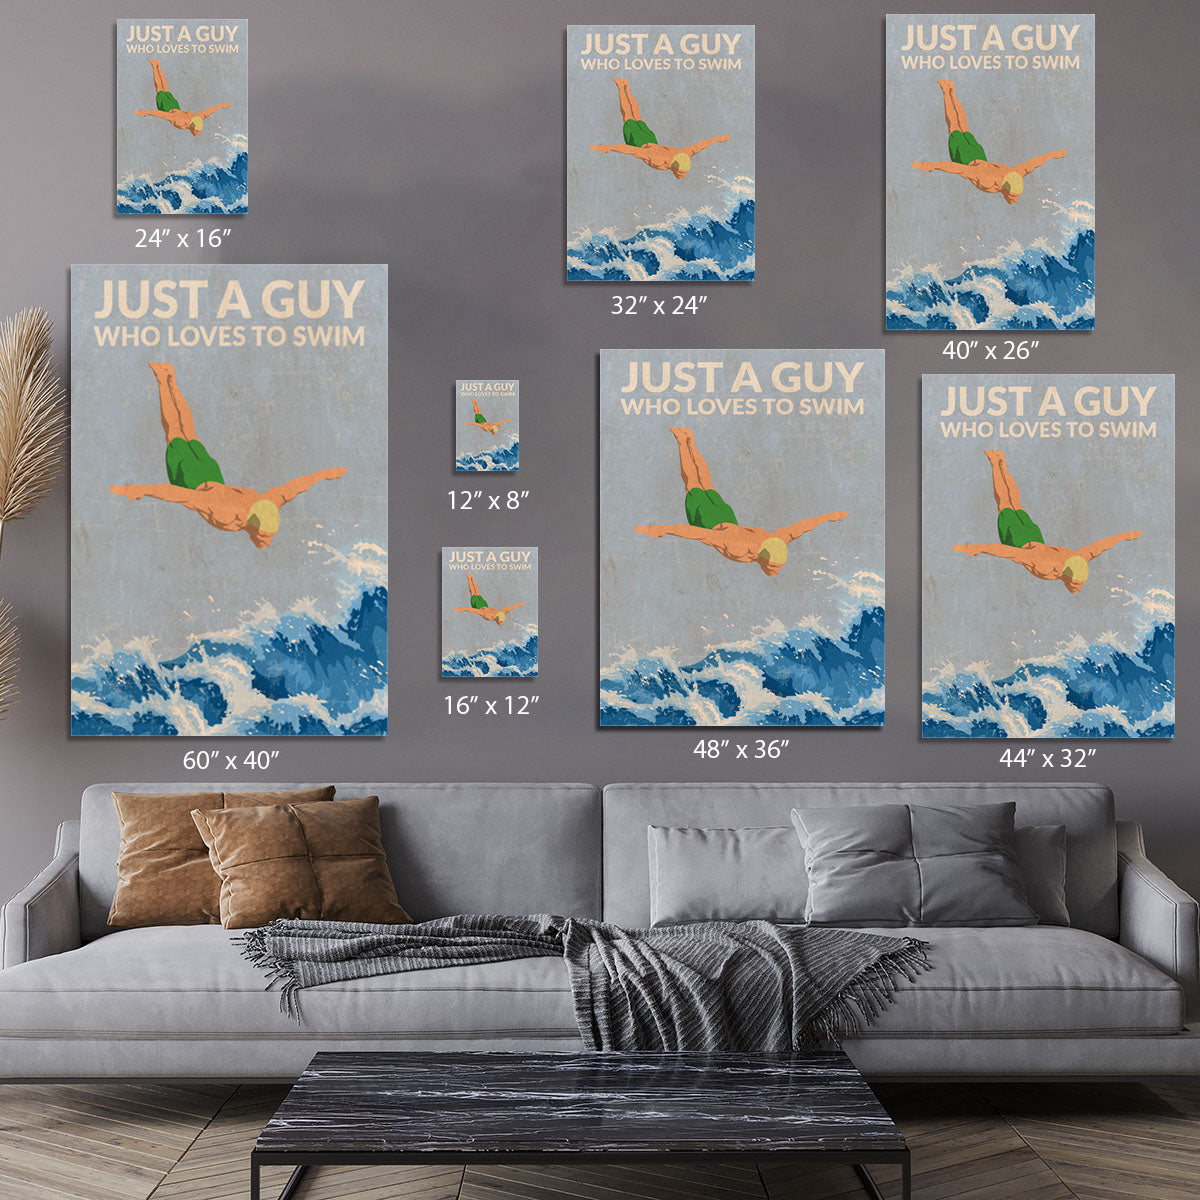 Just a Guy Who Loves To Swim green Canvas Print or Poster - 1x - 7